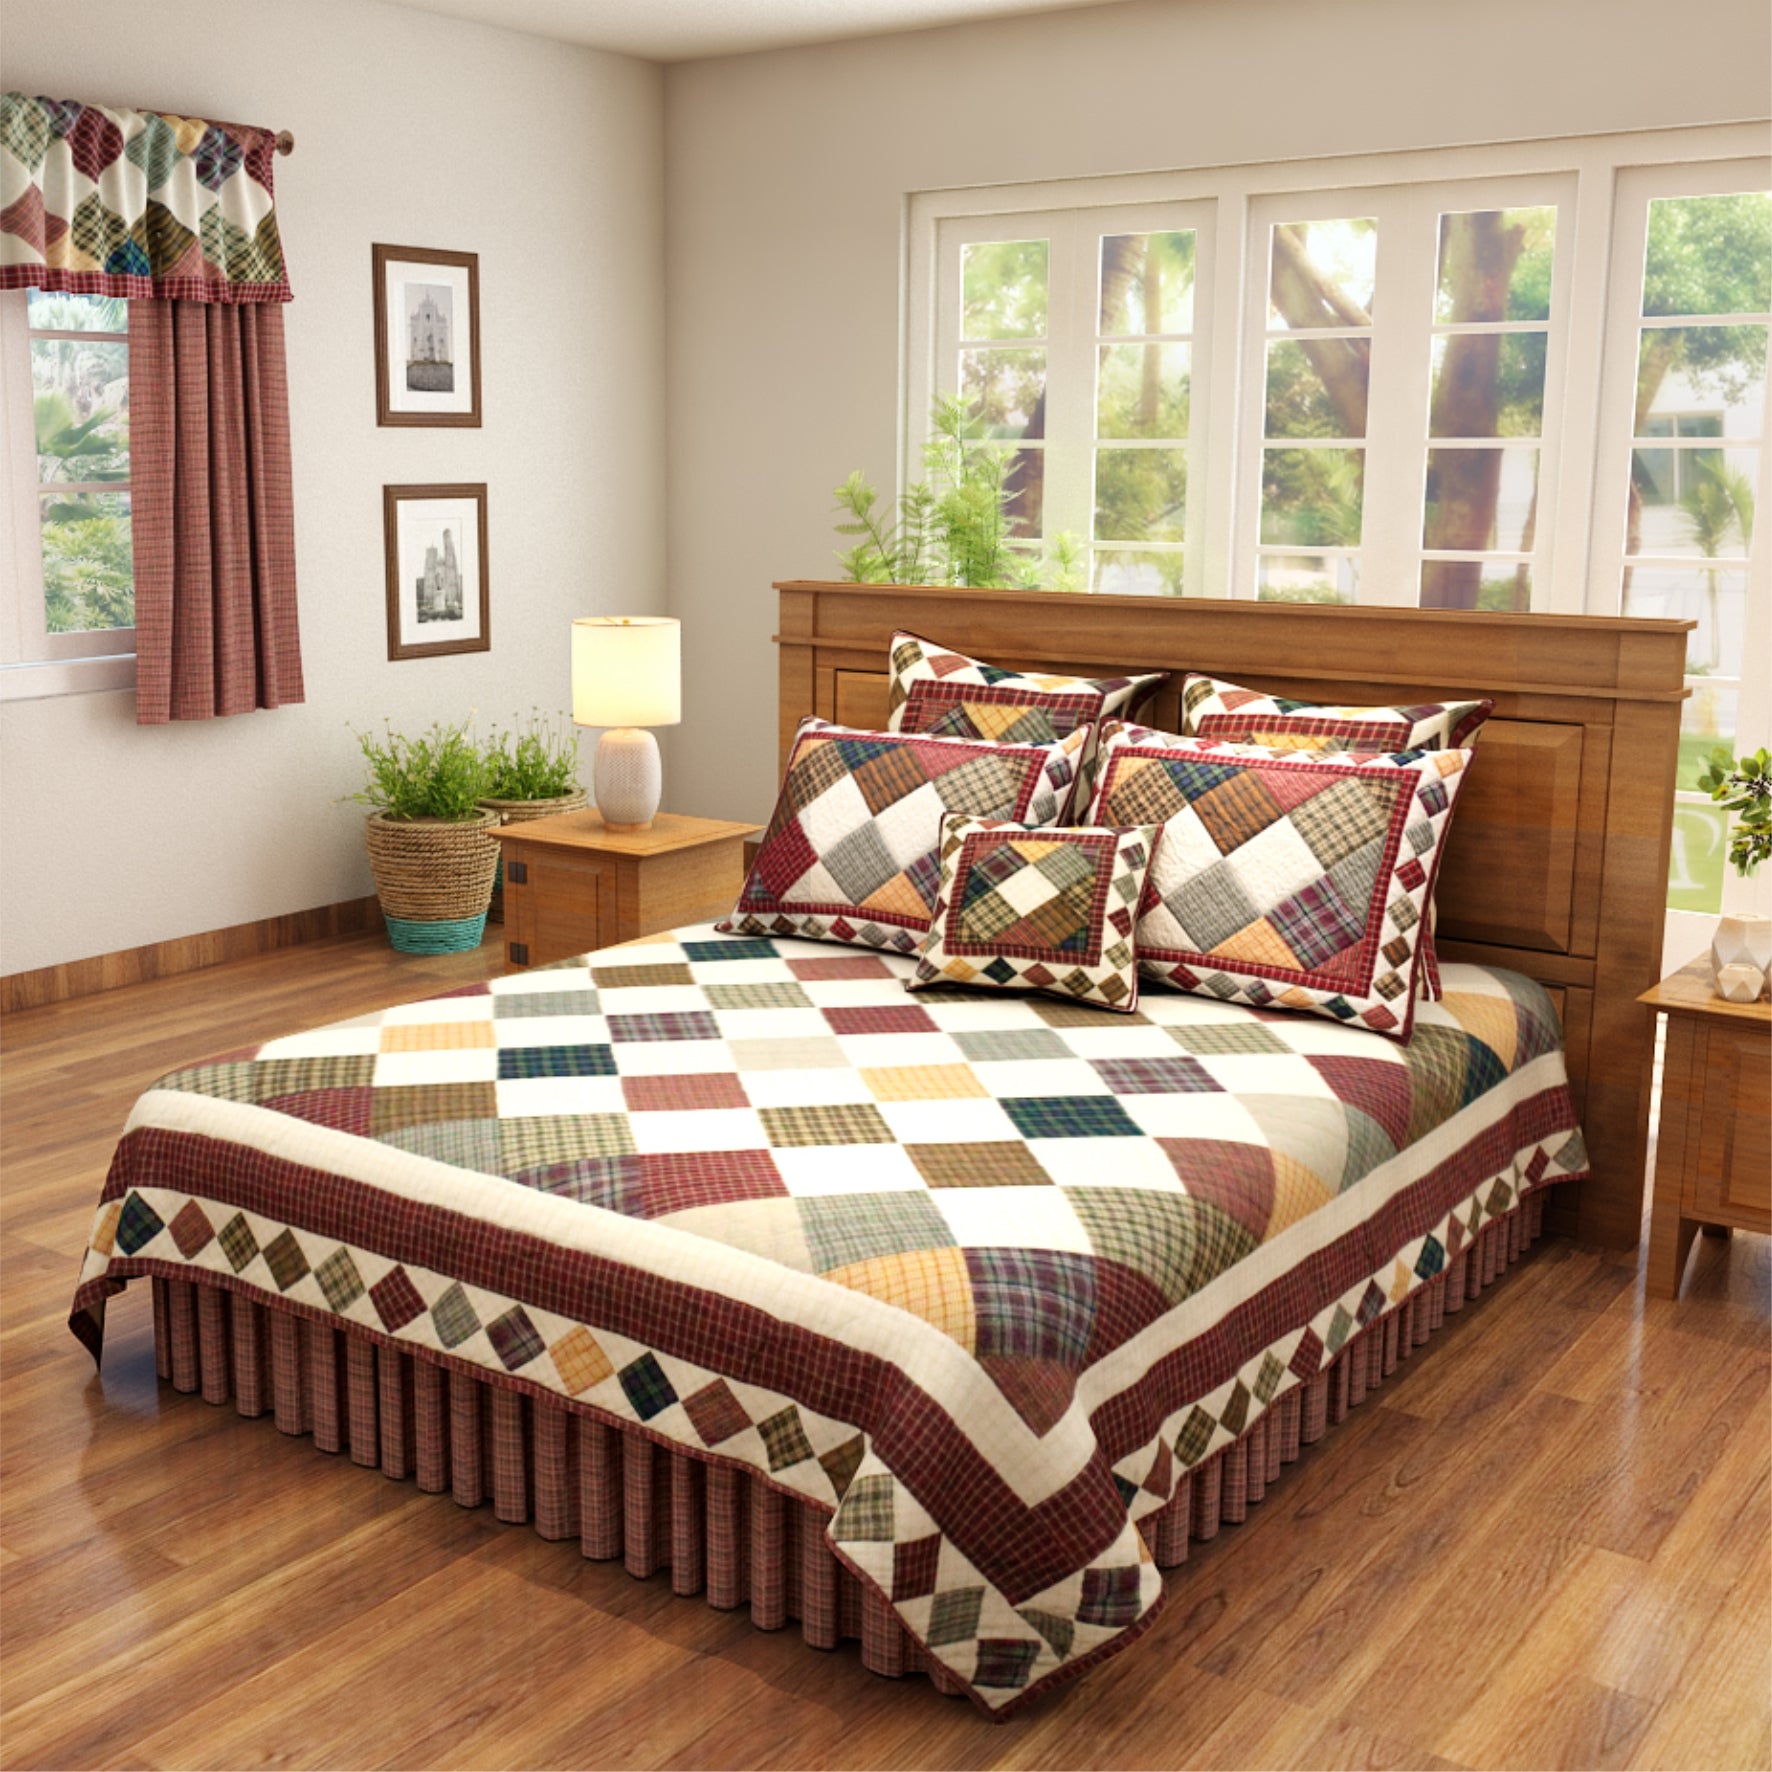 Patch Magic’s Rustic Ambers Quilt - Discover your favorite cottage among creamy patches and multi-colored rustic plaid squares. With an equal mix of color and design, this quilt has diamond stud borders framed in burgundy.